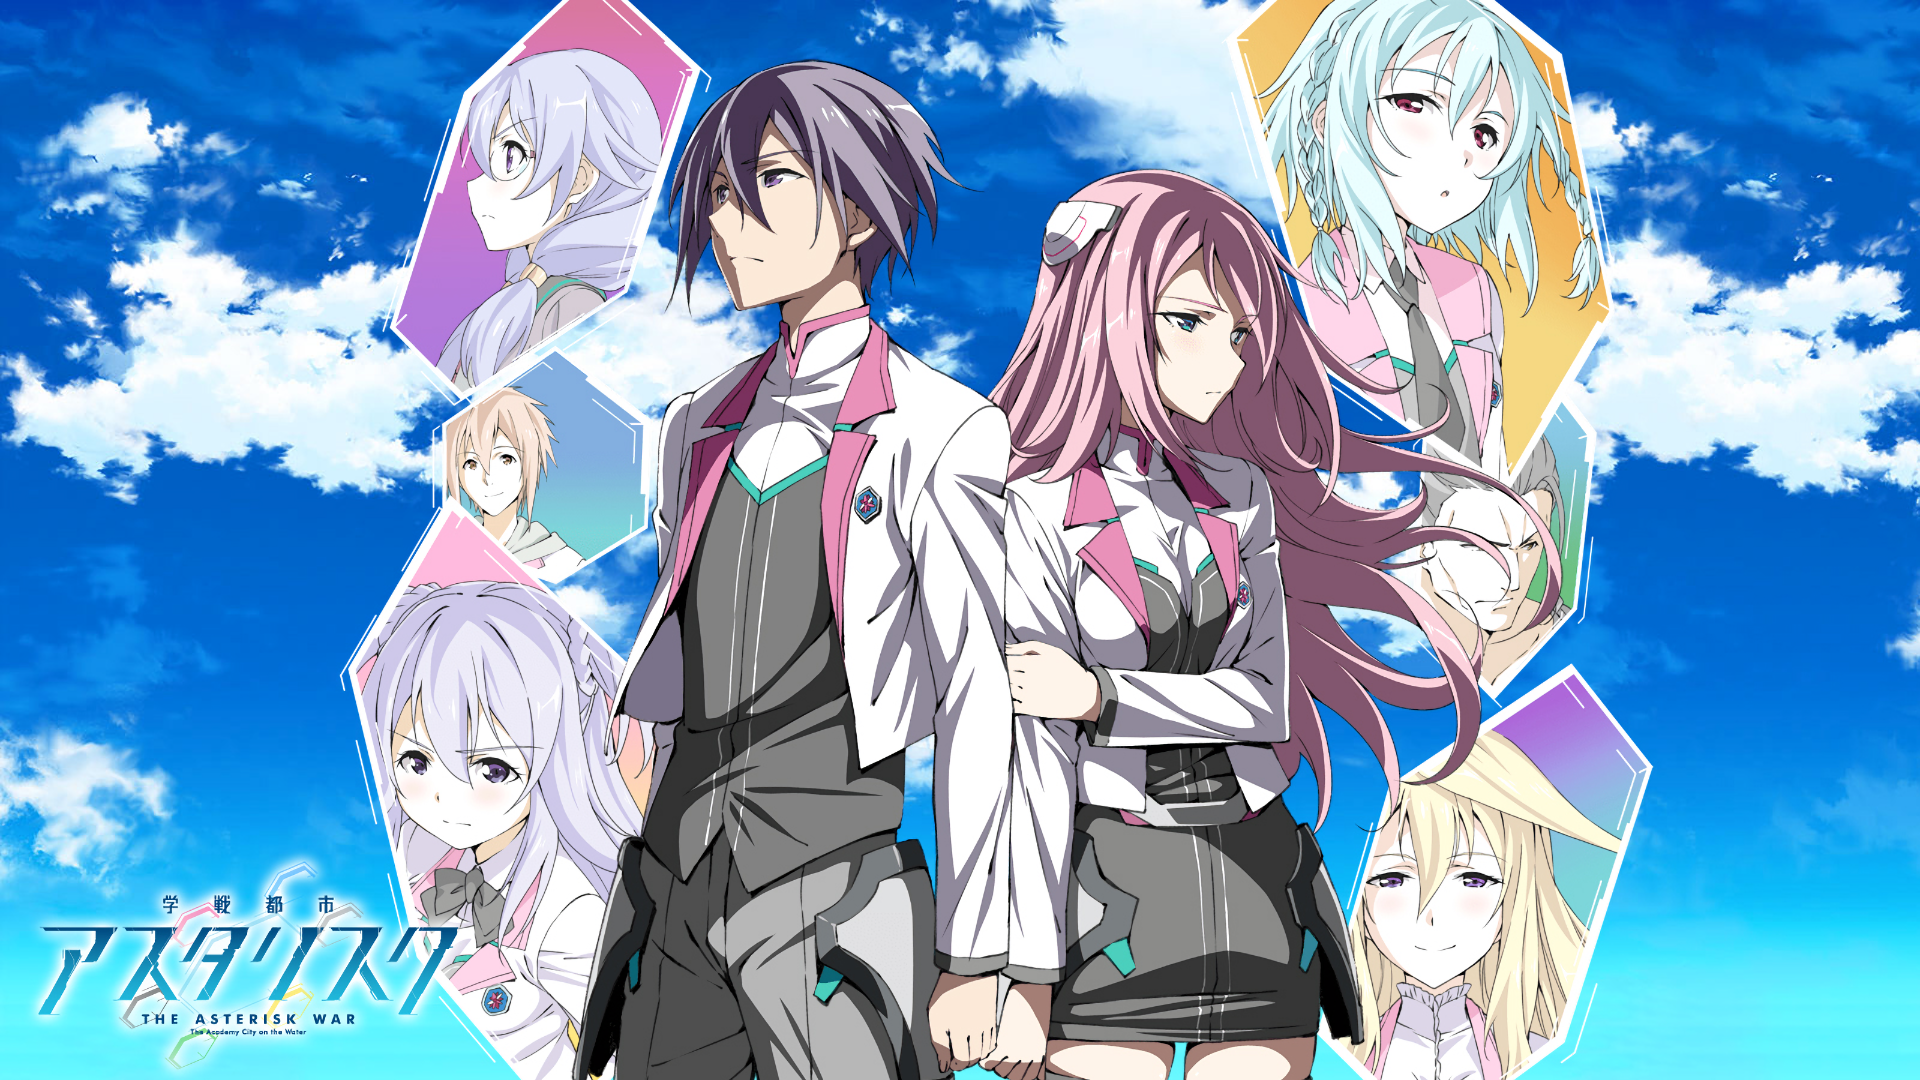 Anime The Asterisk War: The Academy City on the Water HD Wallpaper by YusatsuNao